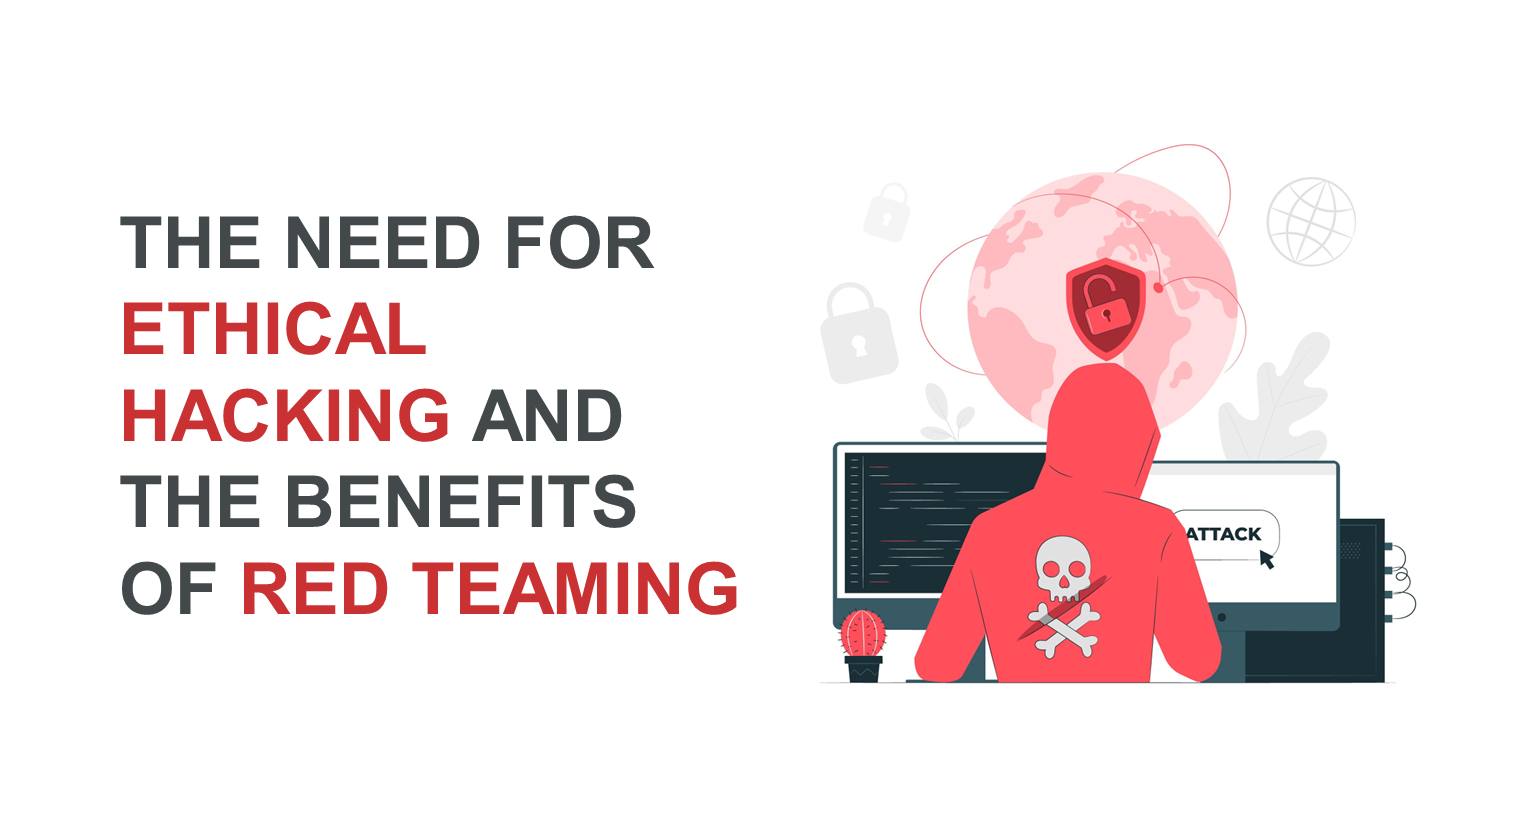 The need for ethical hacking and the benefits of red teaming